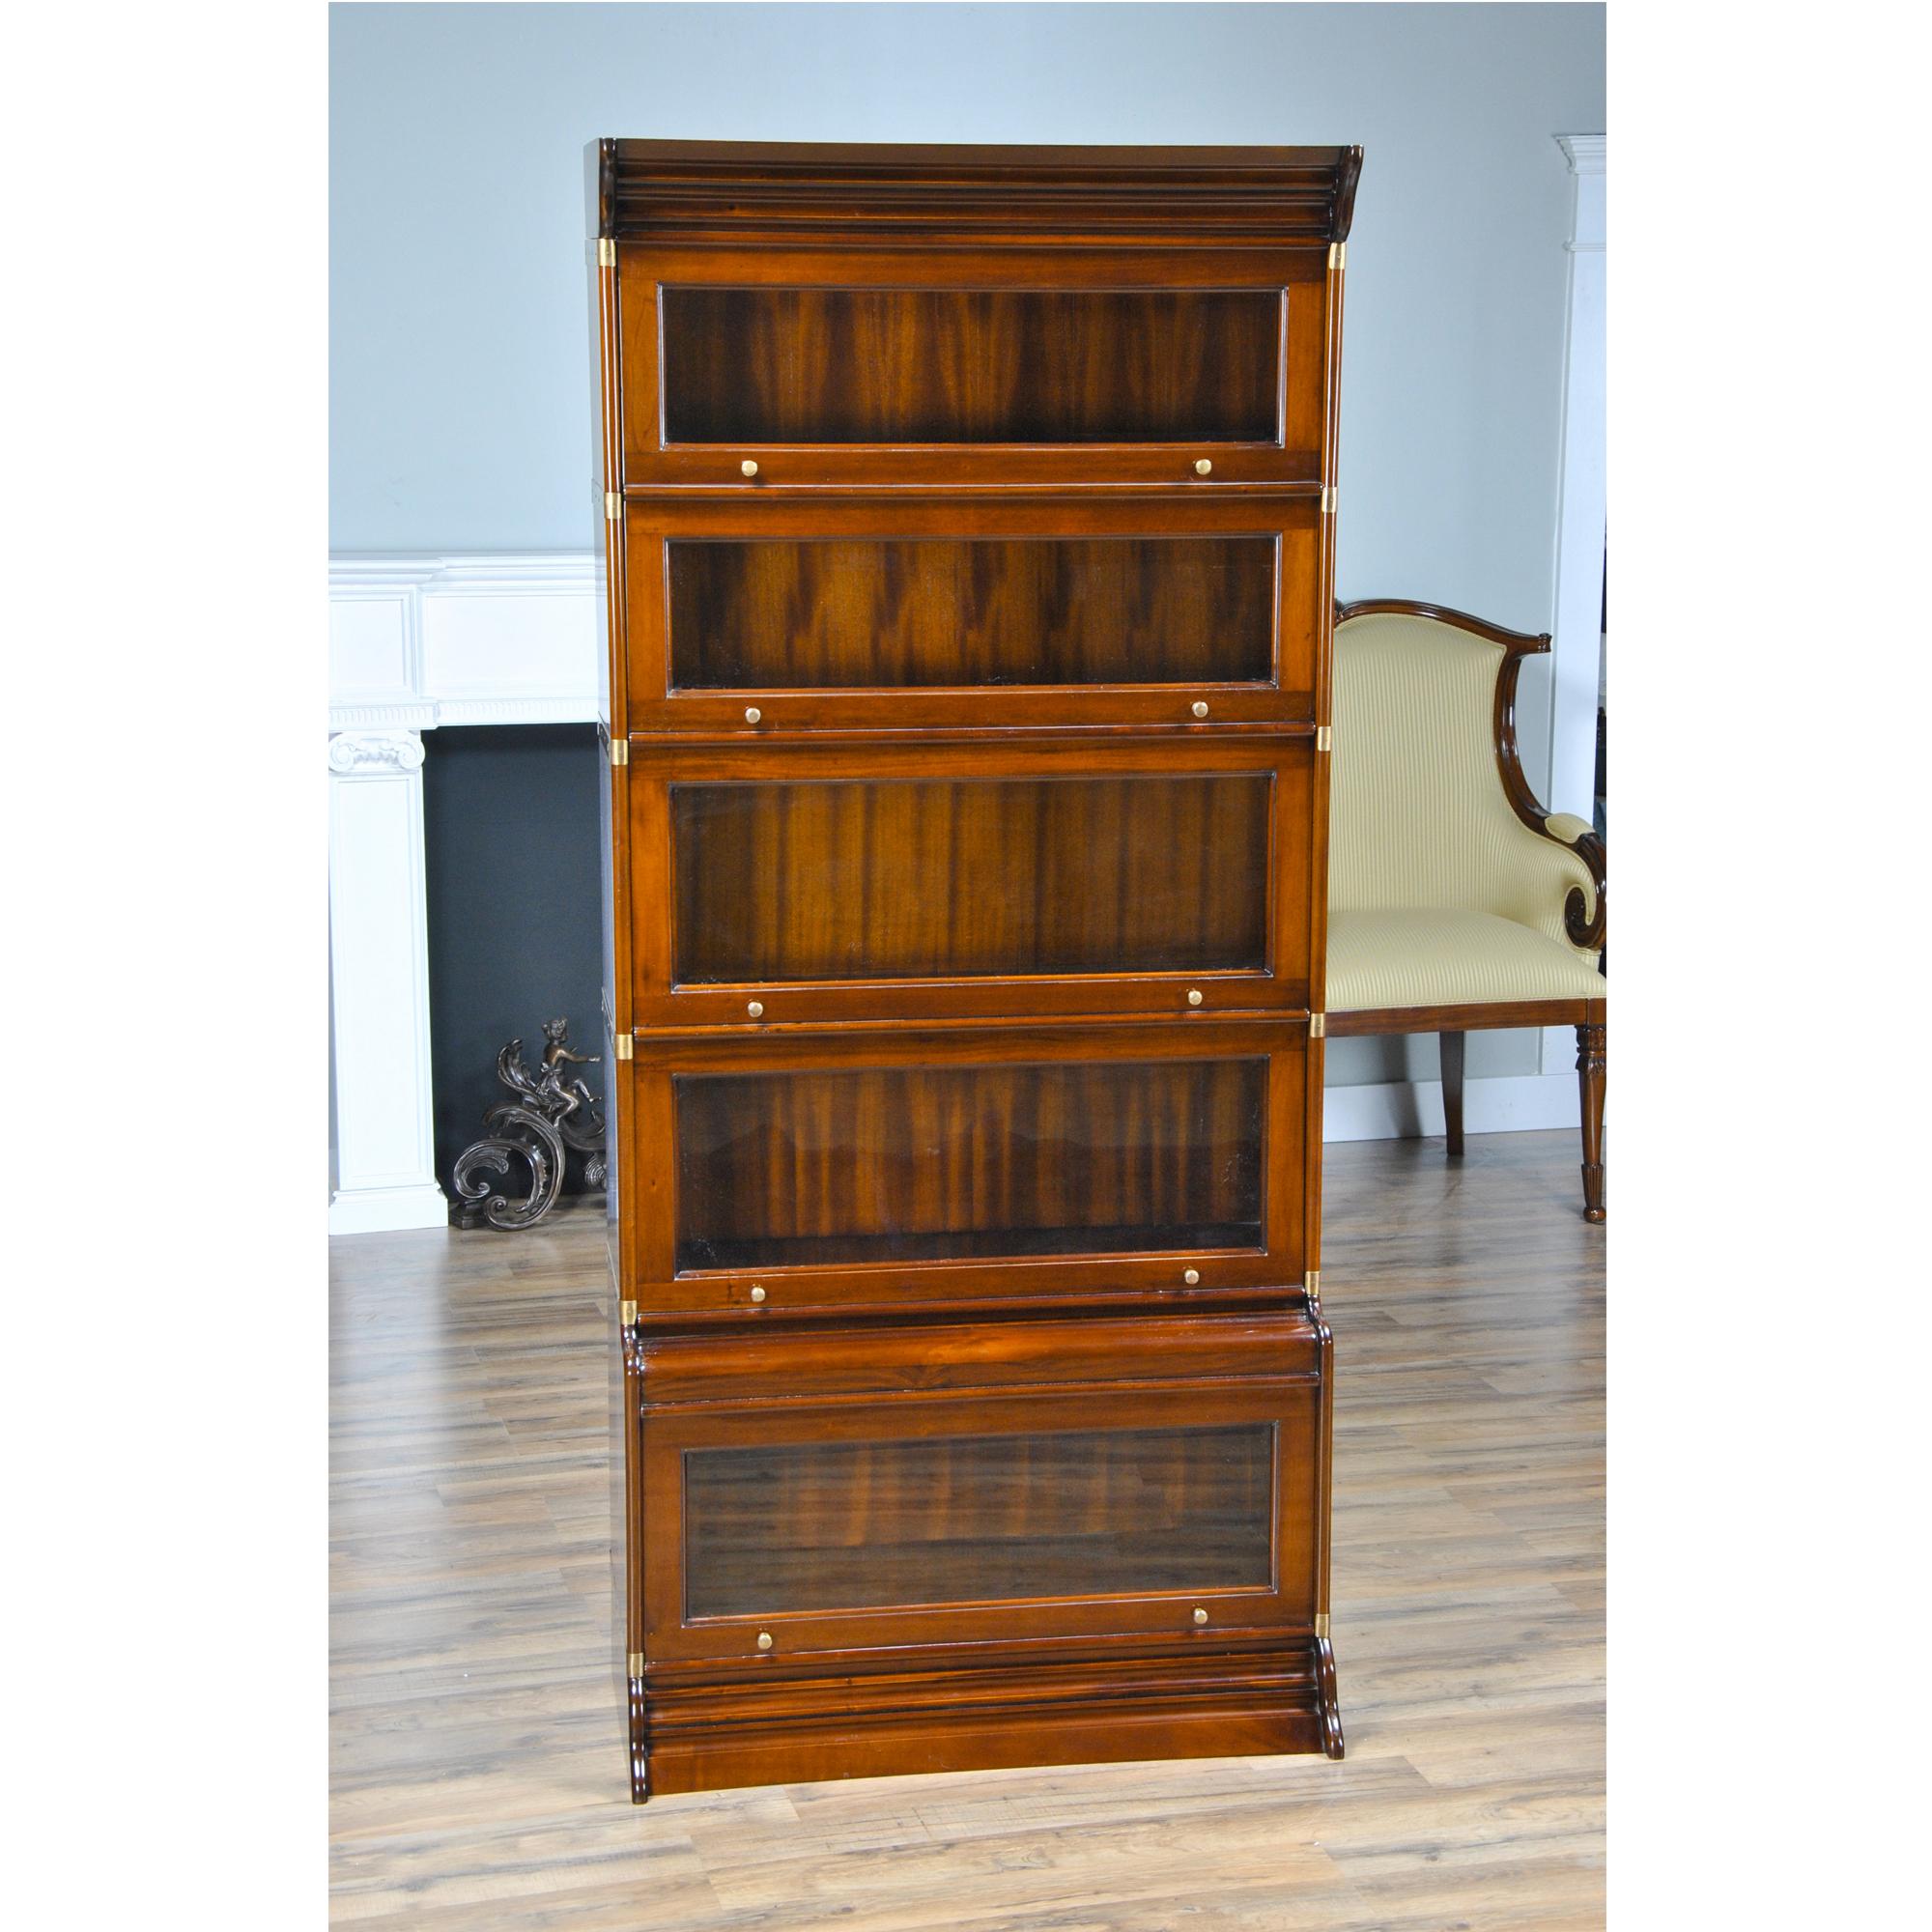 This excellent quality Stacking Mahogany Bookcase or barrister bookcase consists of seven separate pieces: a cap, a base and five glass sections. The oversized atlas sized base section is a real bonus for all the larger texts in your collection. The